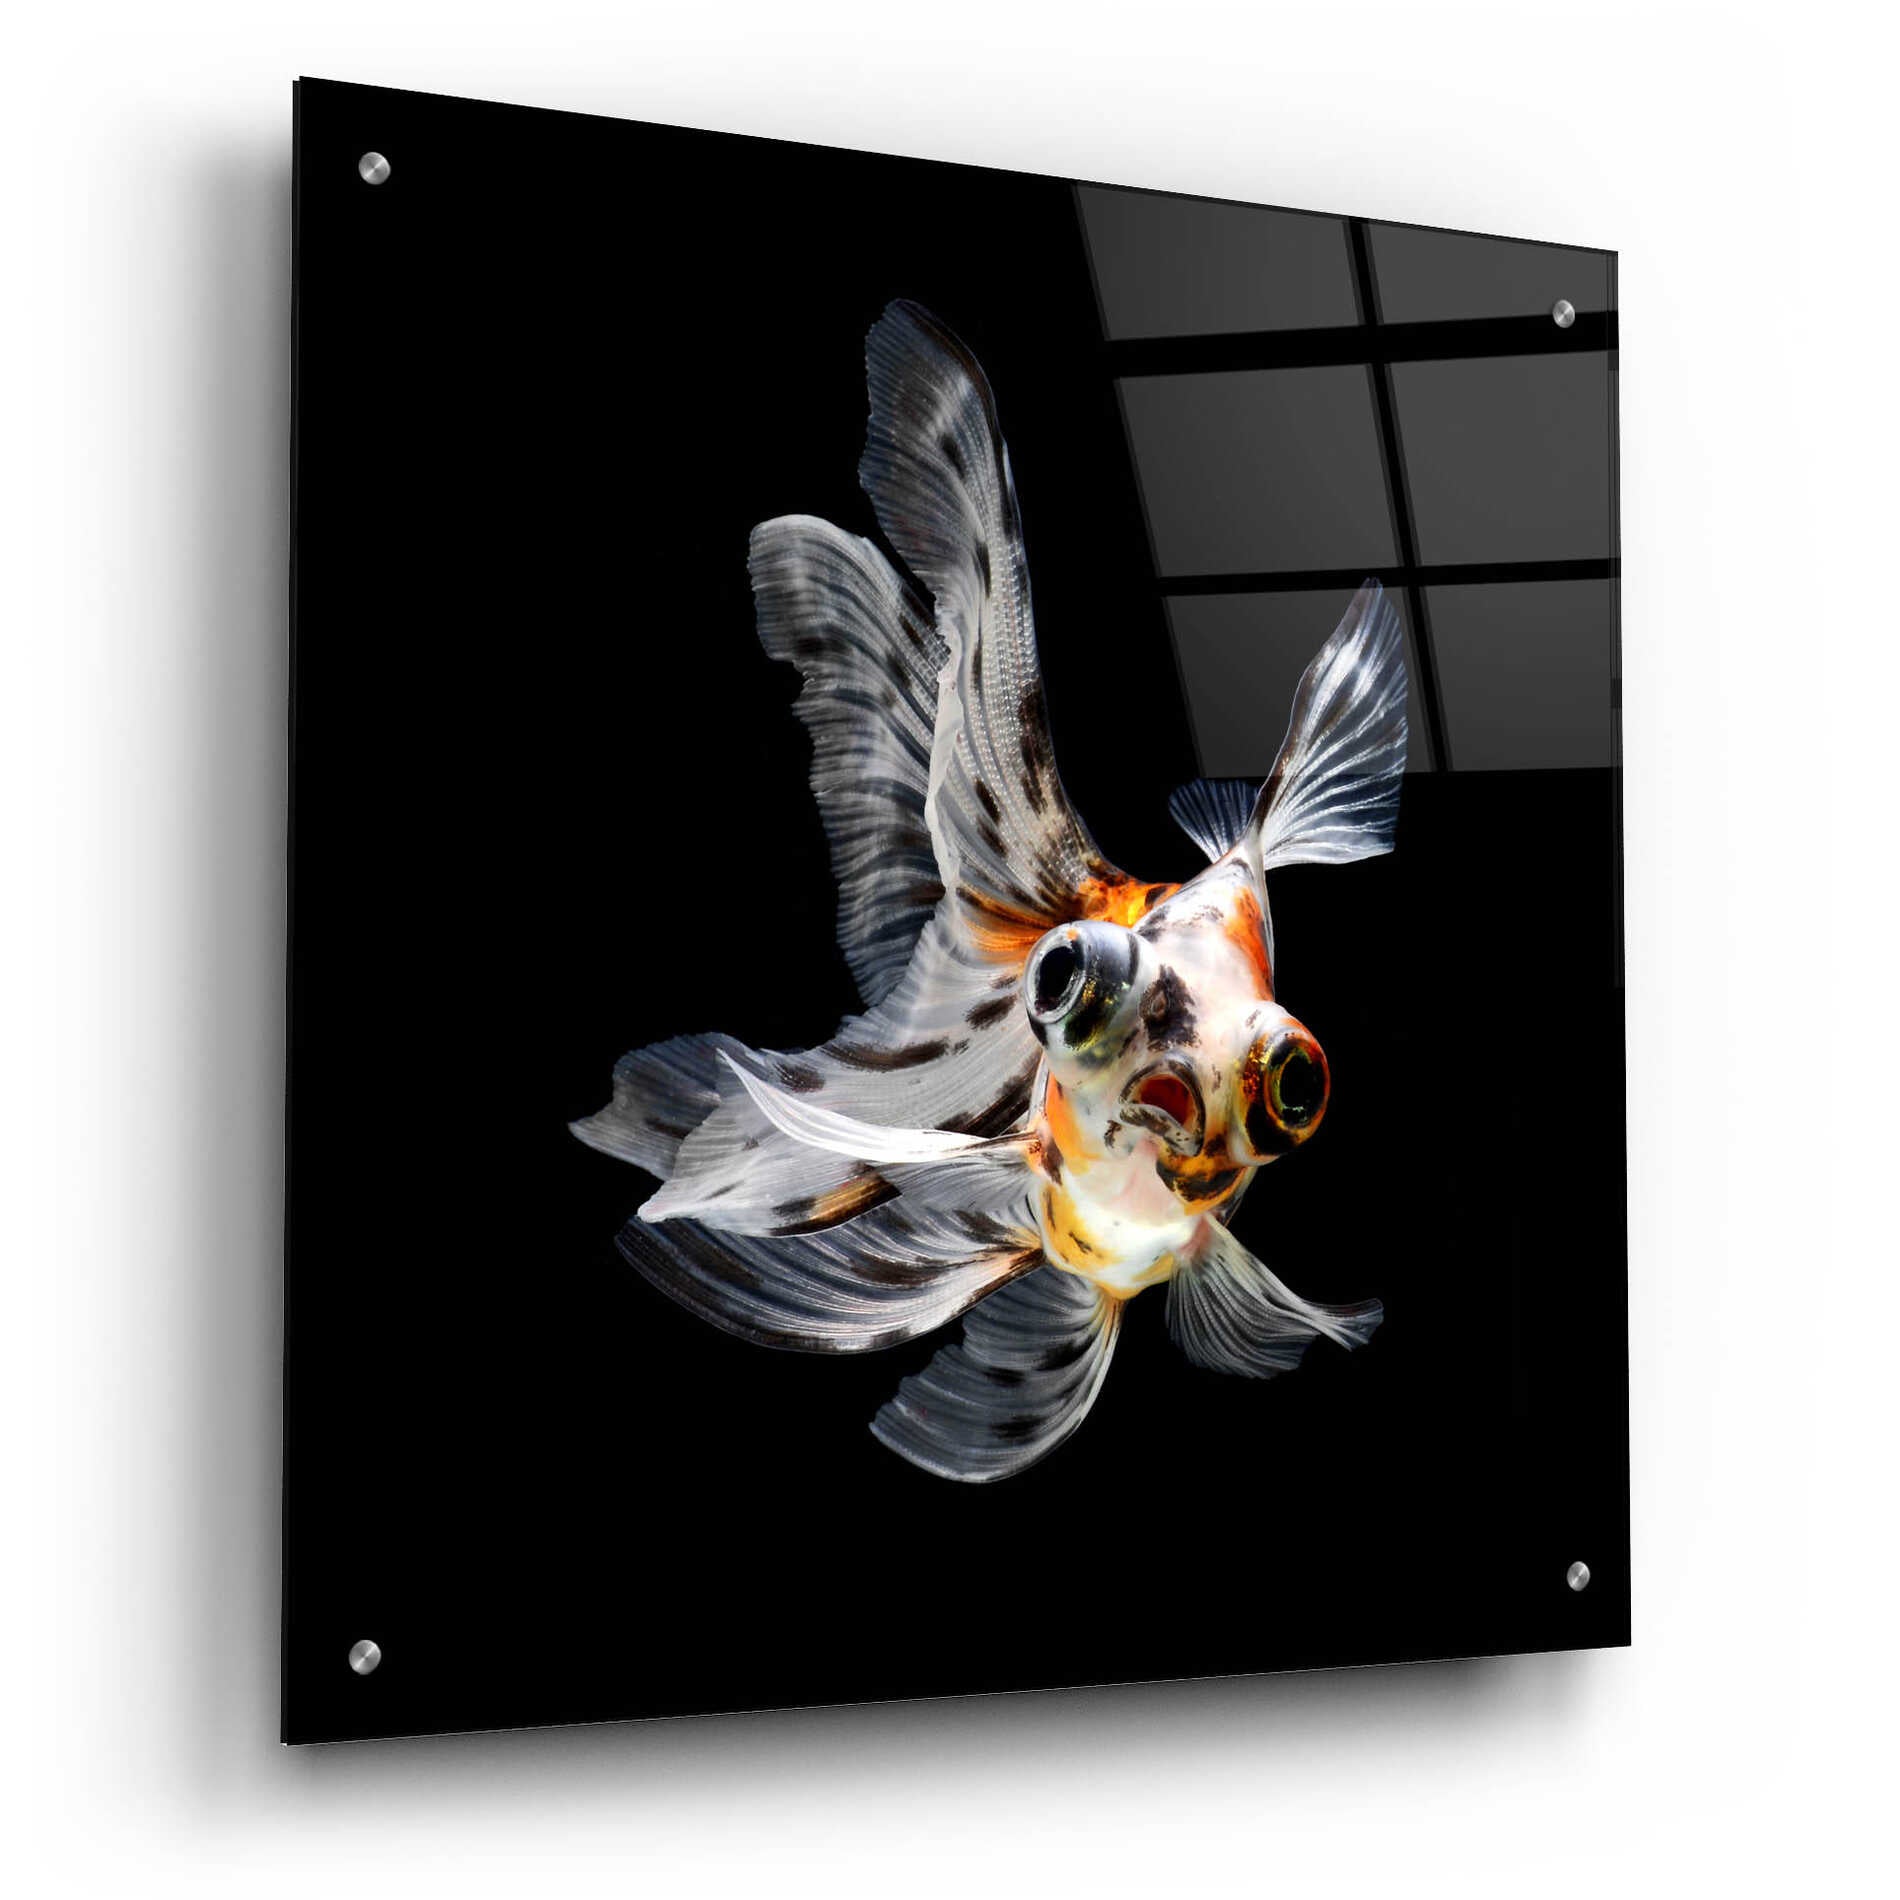 Epic Art 'You Did What' by Epic Portfolio Acrylic Glass Wall Art,24x24